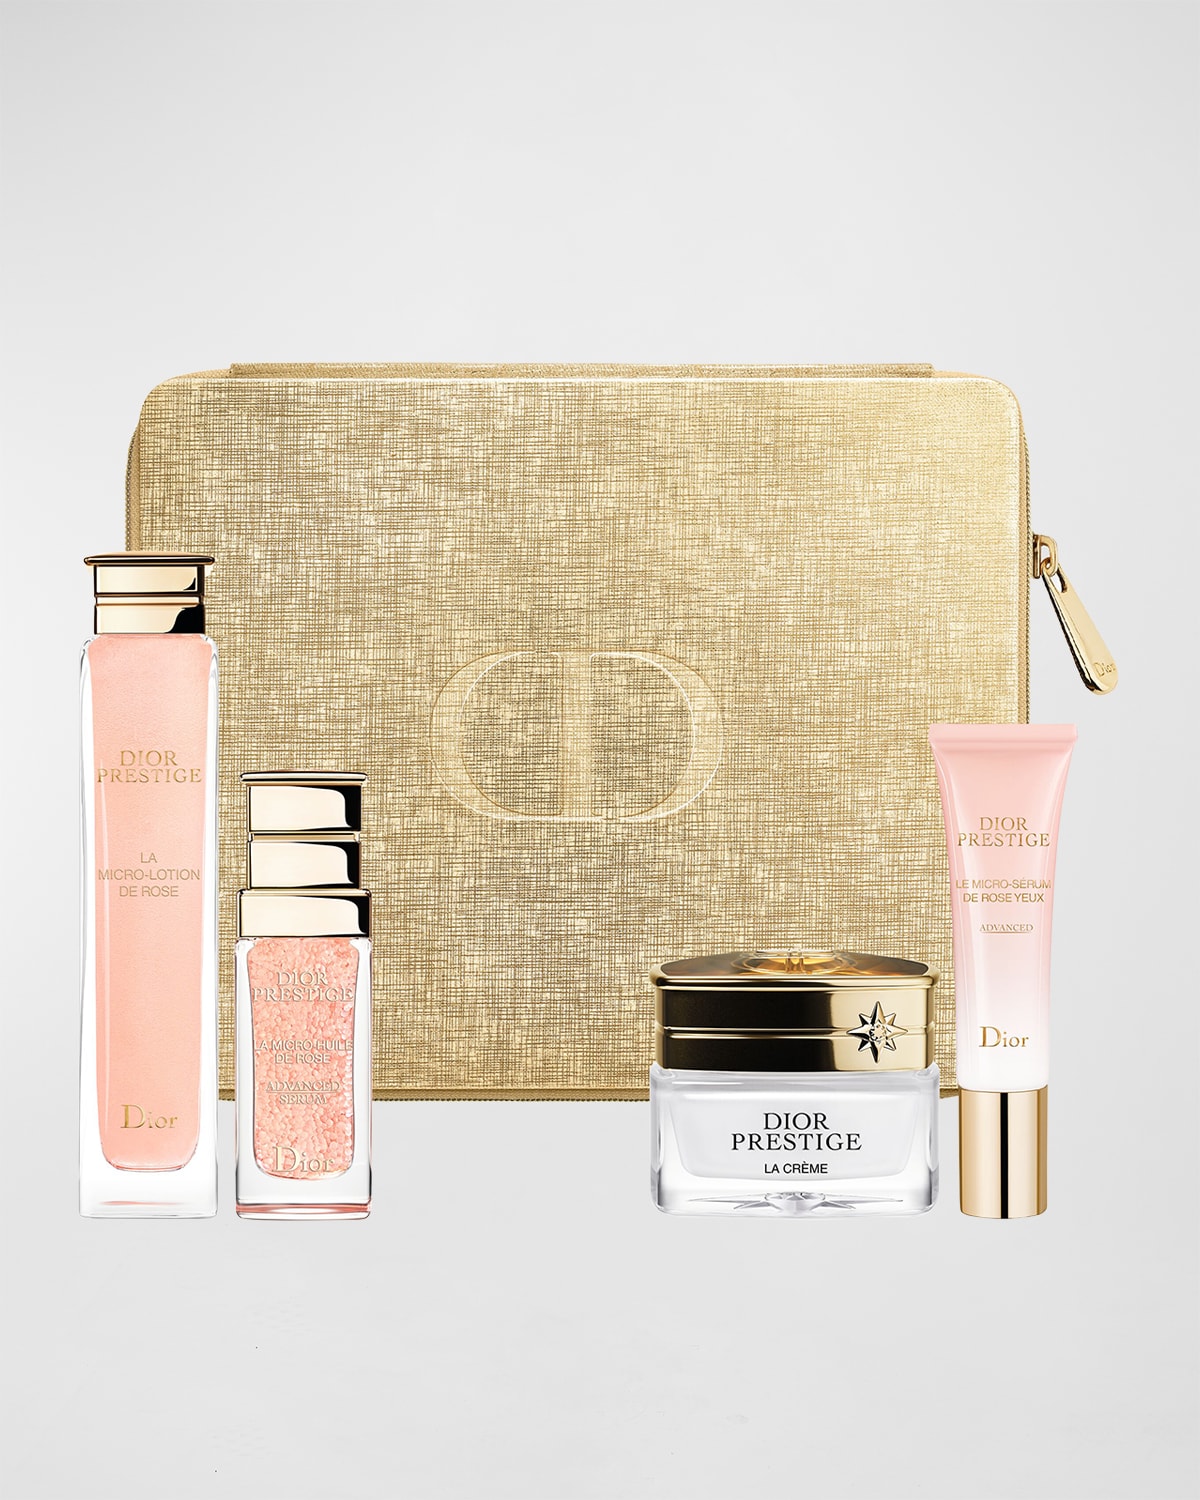 Limited Edition Dior Prestige Anti-Aging Discovery Set